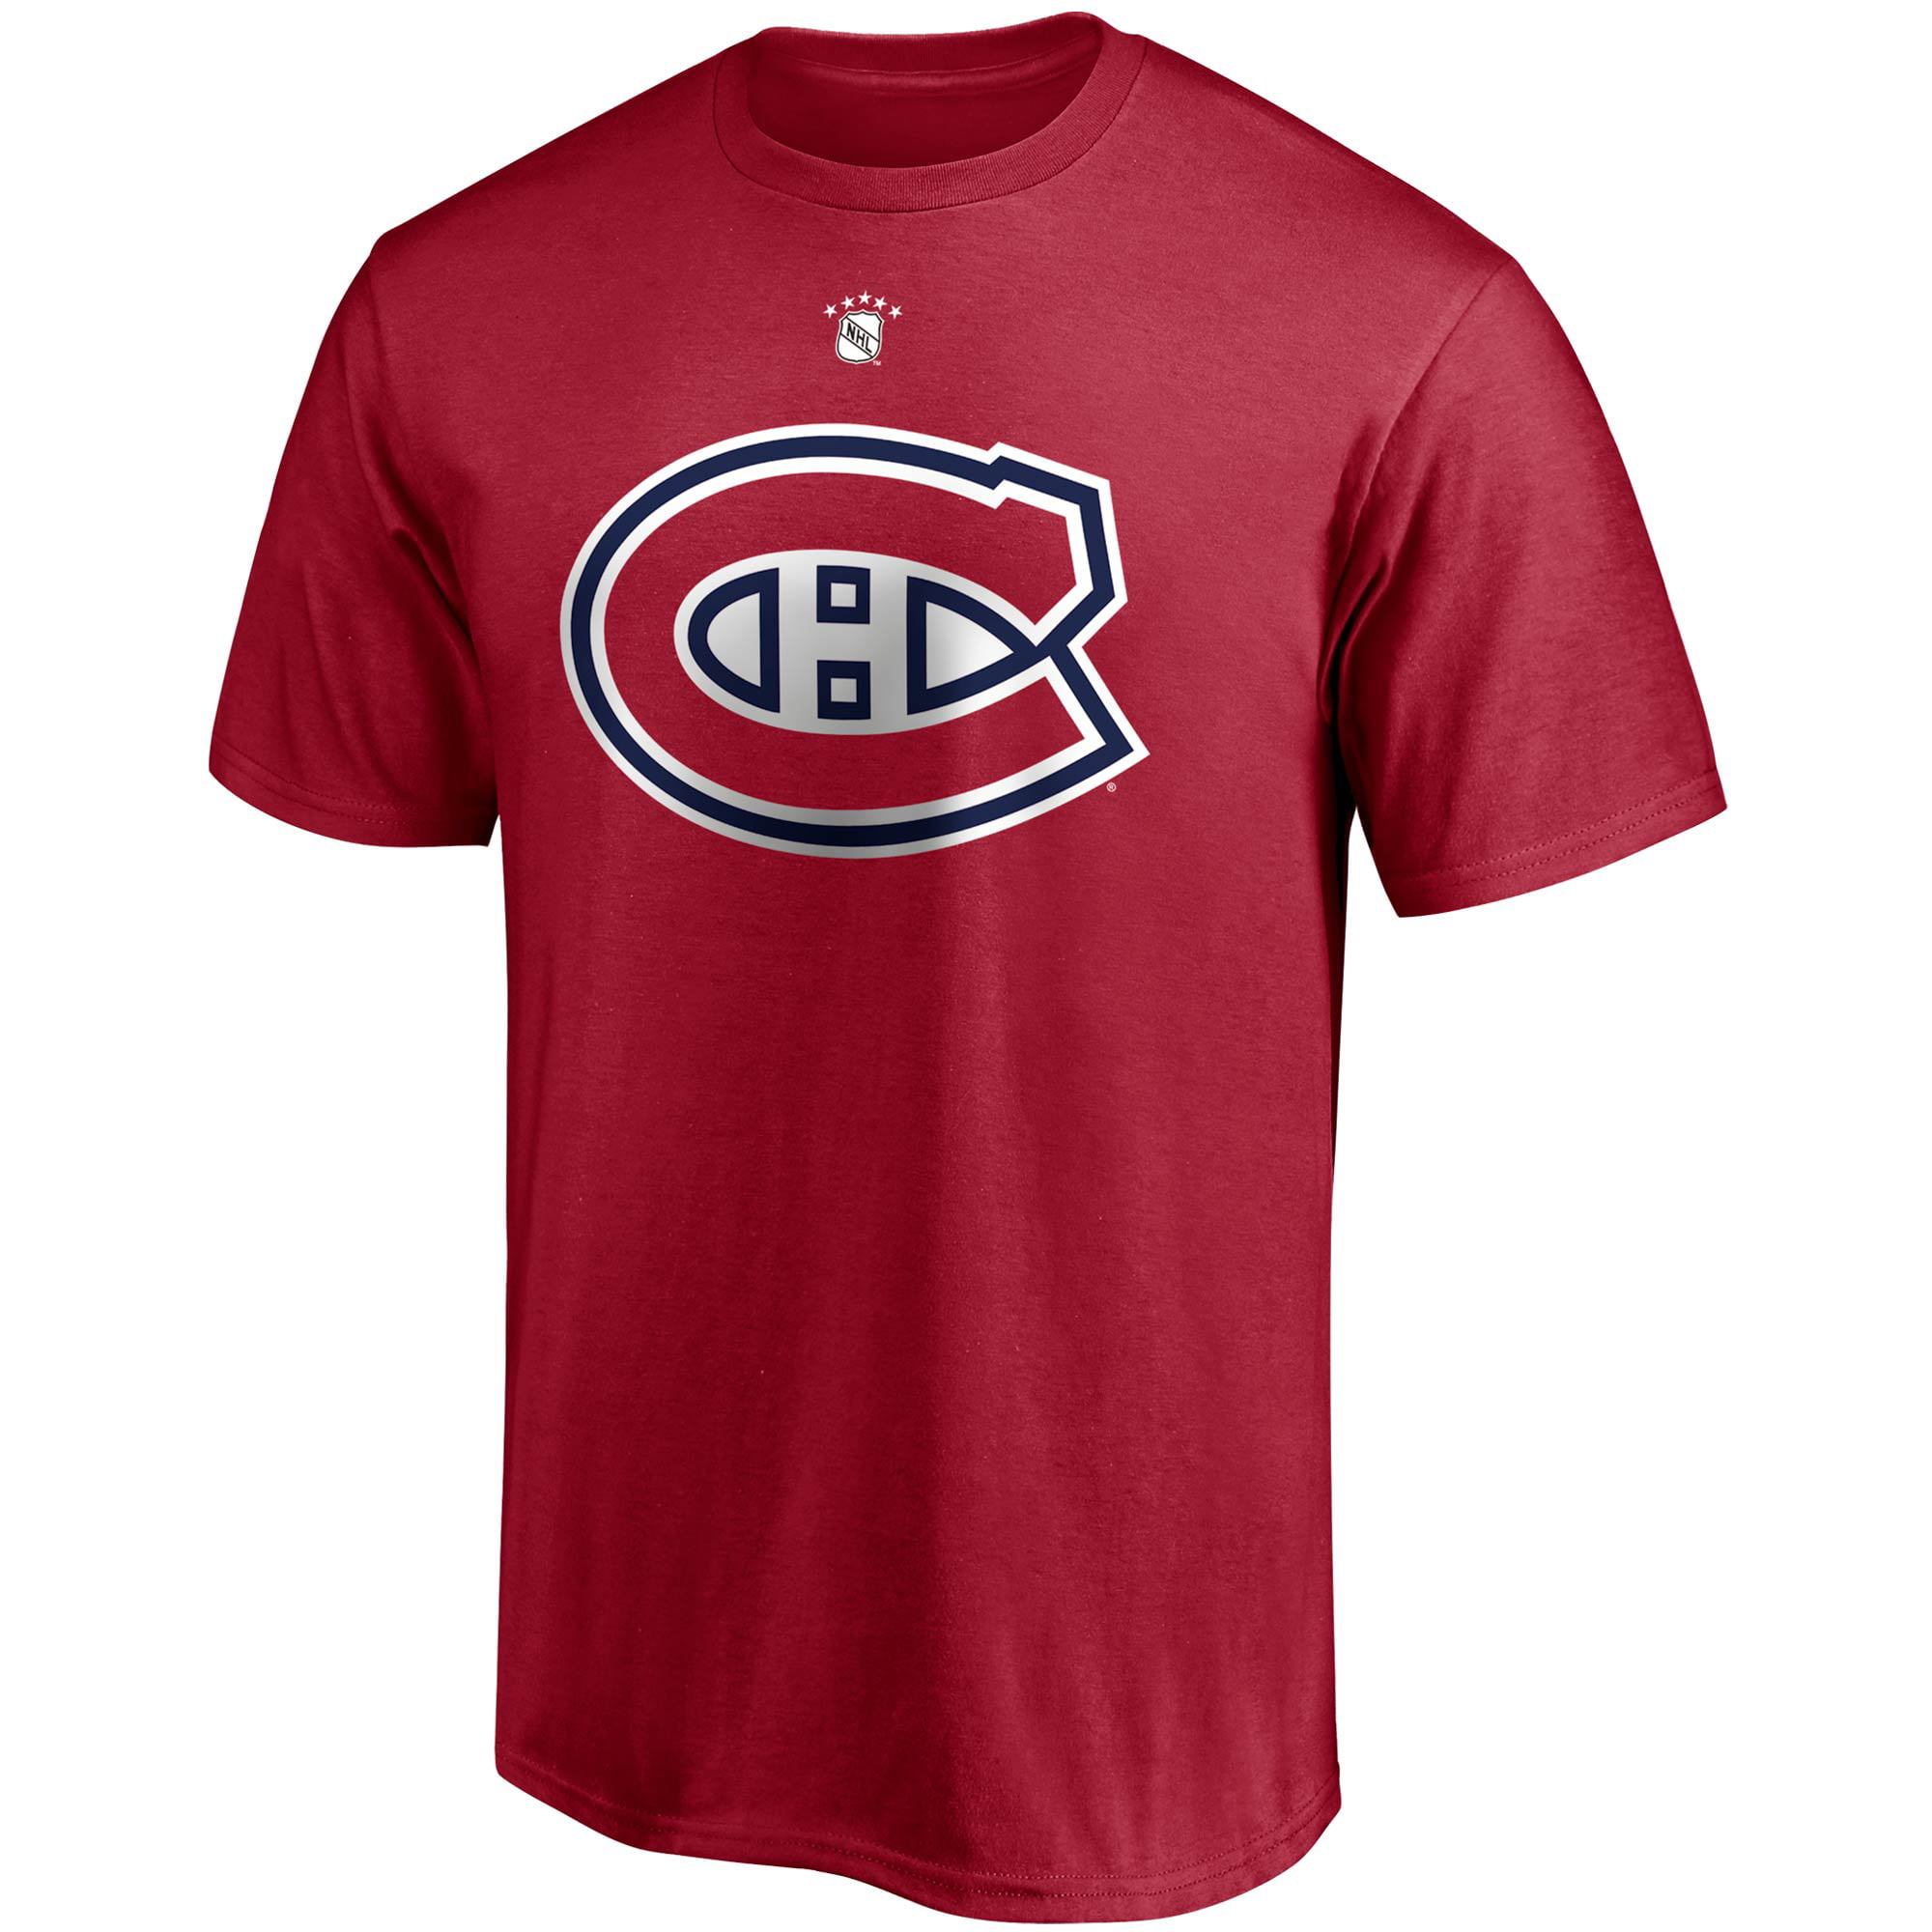 Montreal Canadiens retired player jersey